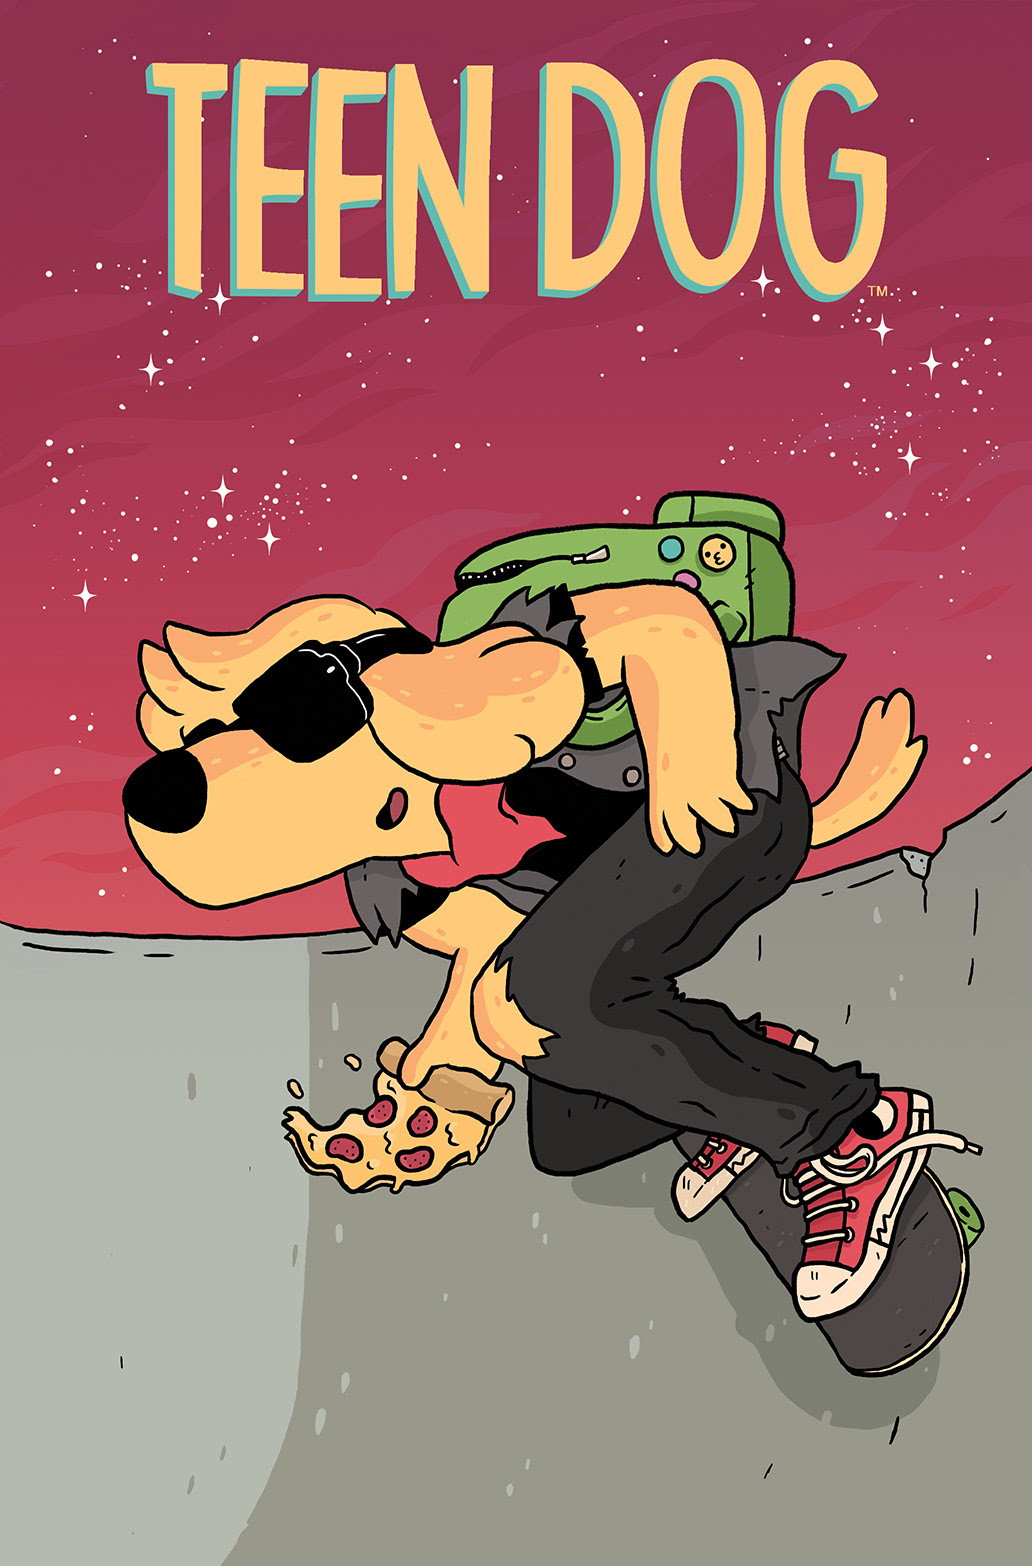 TEEN DOG #1 Cover A by Jake Lawrence